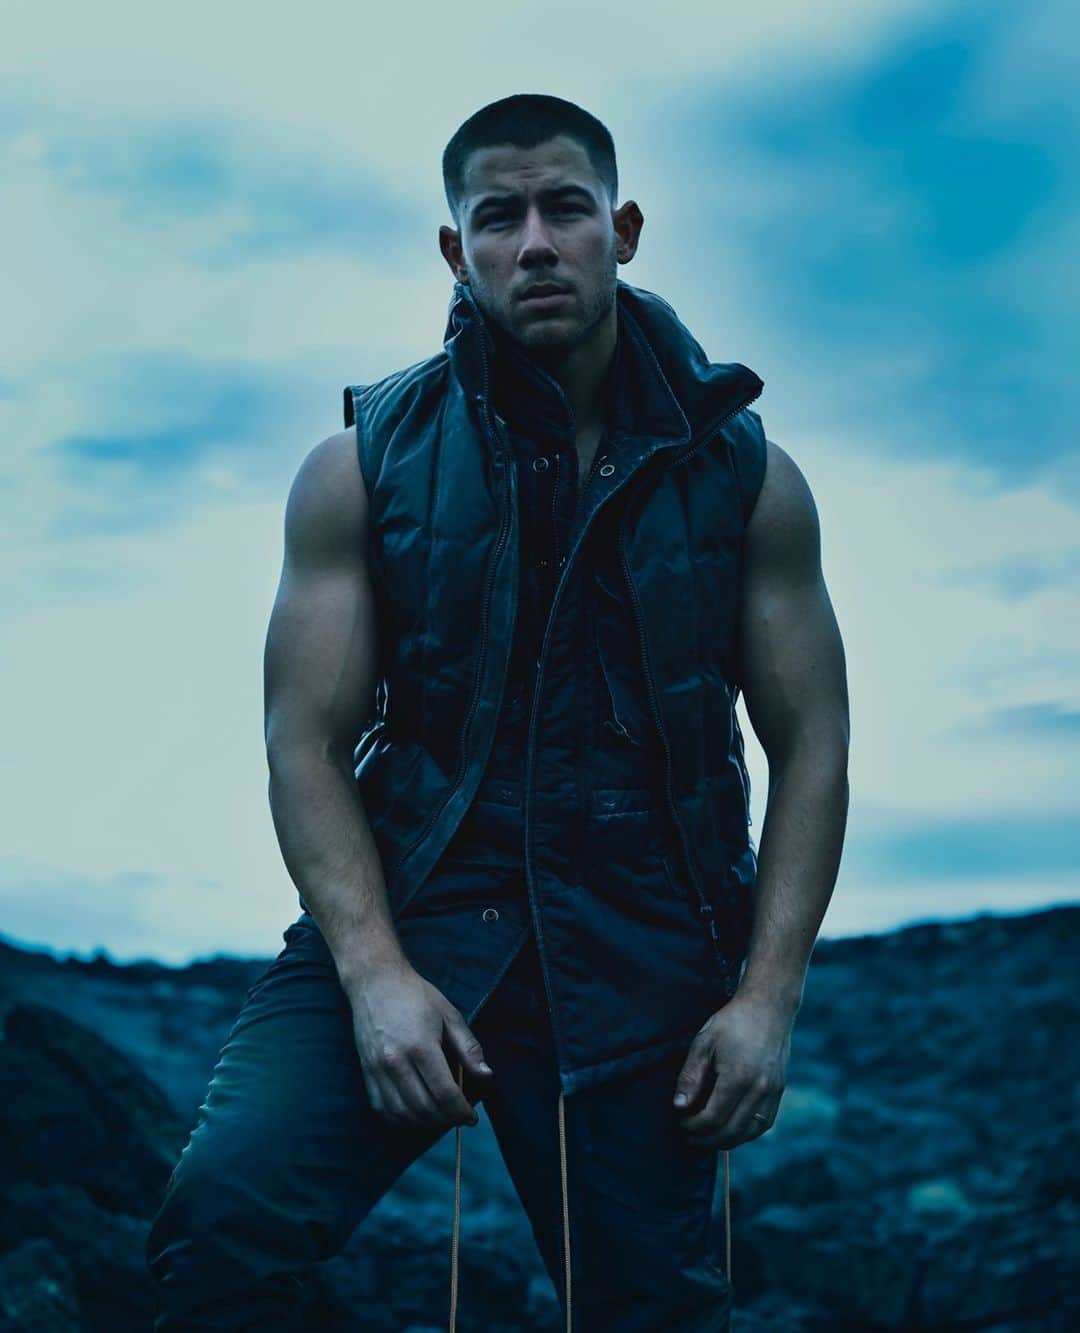 Rolling Stoneのインスタグラム：「Nick Jonas has announced his third solo album, 'Spaceman,' sharing the title track on Thursday. The album will be released on March 12th via Island Records.⁠ ⁠ Over a groovy, glittering beat, Jonas sings on “Spaceman” about feeling alone in a tumultuous world and the desire to rise above it all. He alludes to the 2020 election, the coronavirus pandemic, and ongoing inequality in the lyrics: “They say it’s a phase, it’ll change if we vote/And I pray that it will, but I know that it won’t/I’m a spaceman/Yeah, I’m a spaceman/And the numbers are high but we keep goin’ down/’Cause we ain’t supposed to live with nobody around/I’m a spaceman/Yeah, I’m a spaceman.”⁠ ⁠ Tap the link in bio to listen.⁠ ⁠ Photo: @anthonymandler」